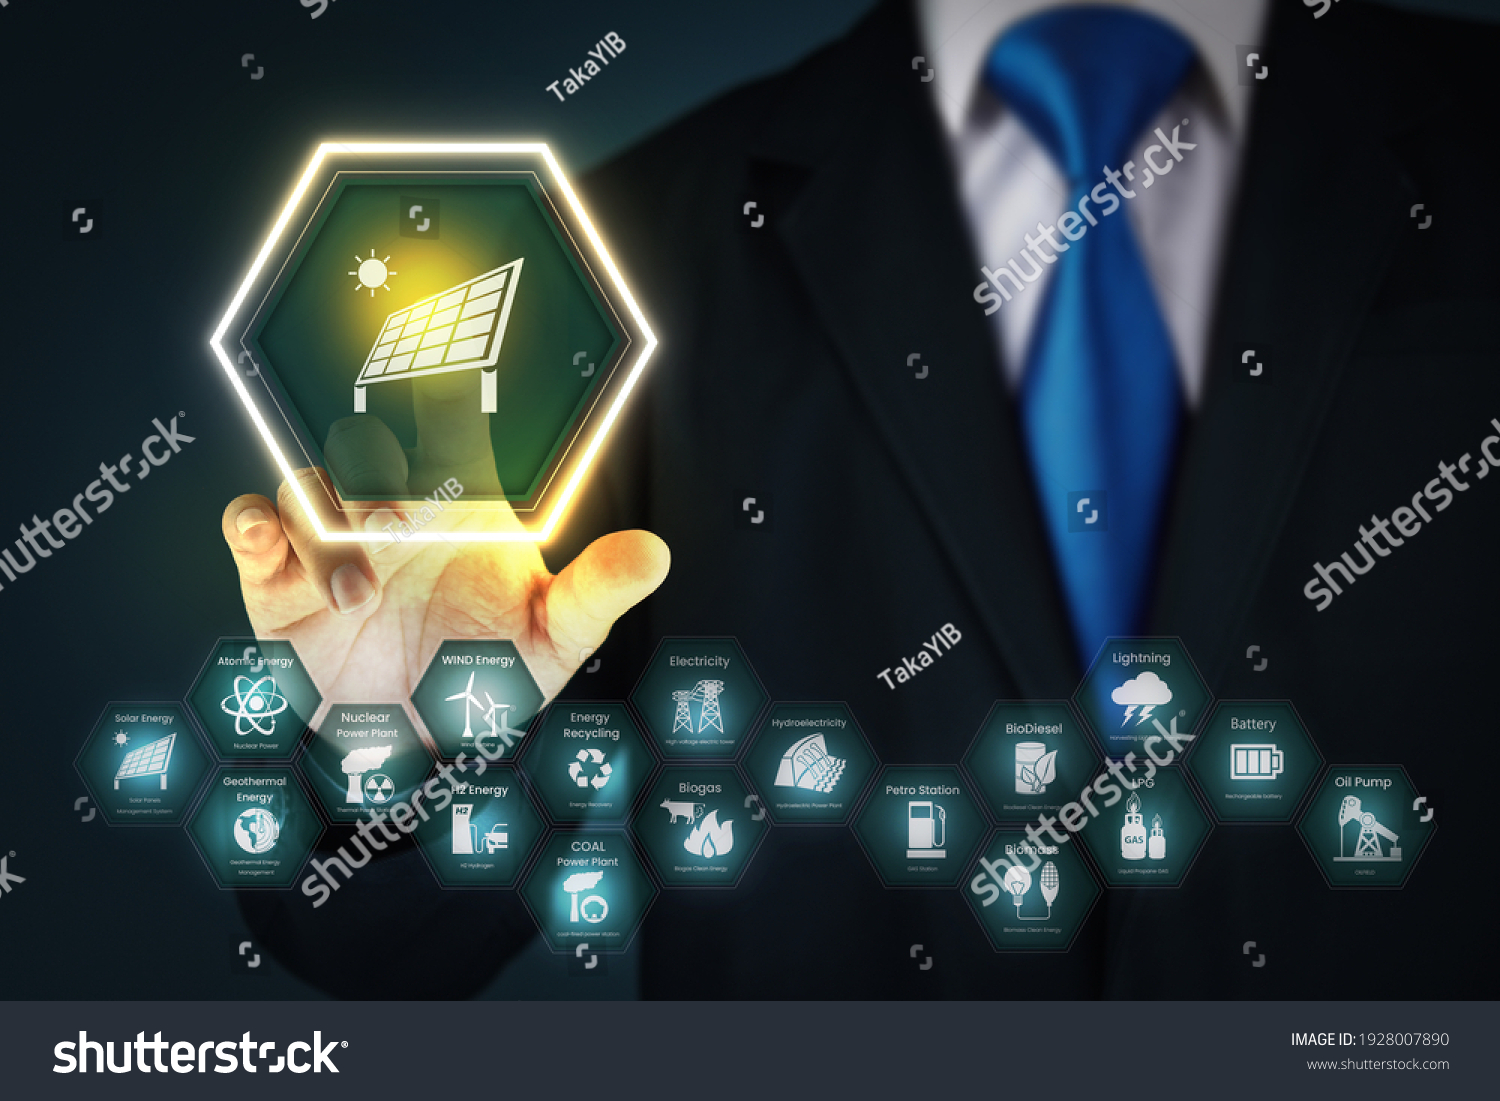 A man touches solar panel icon on a virtual screen.
businessman pressing button on virtual screens with hexagons and transparent honeycomb.
the concept of energy. #1928007890